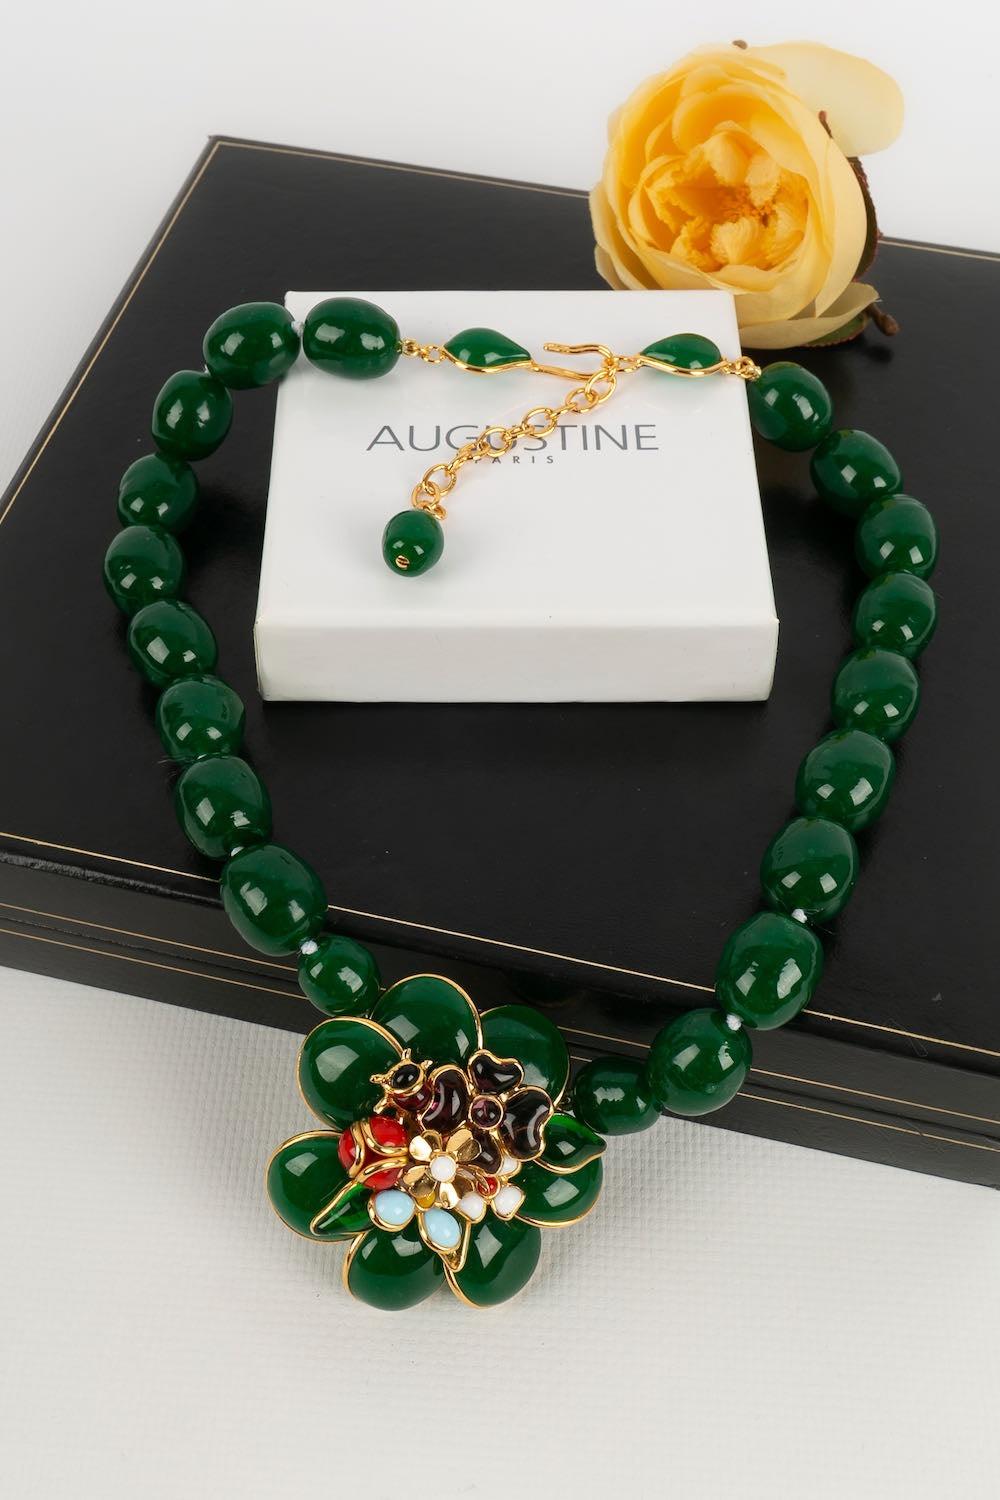 Augustine Necklace in Gold Metal and Green Glass Paste For Sale 2